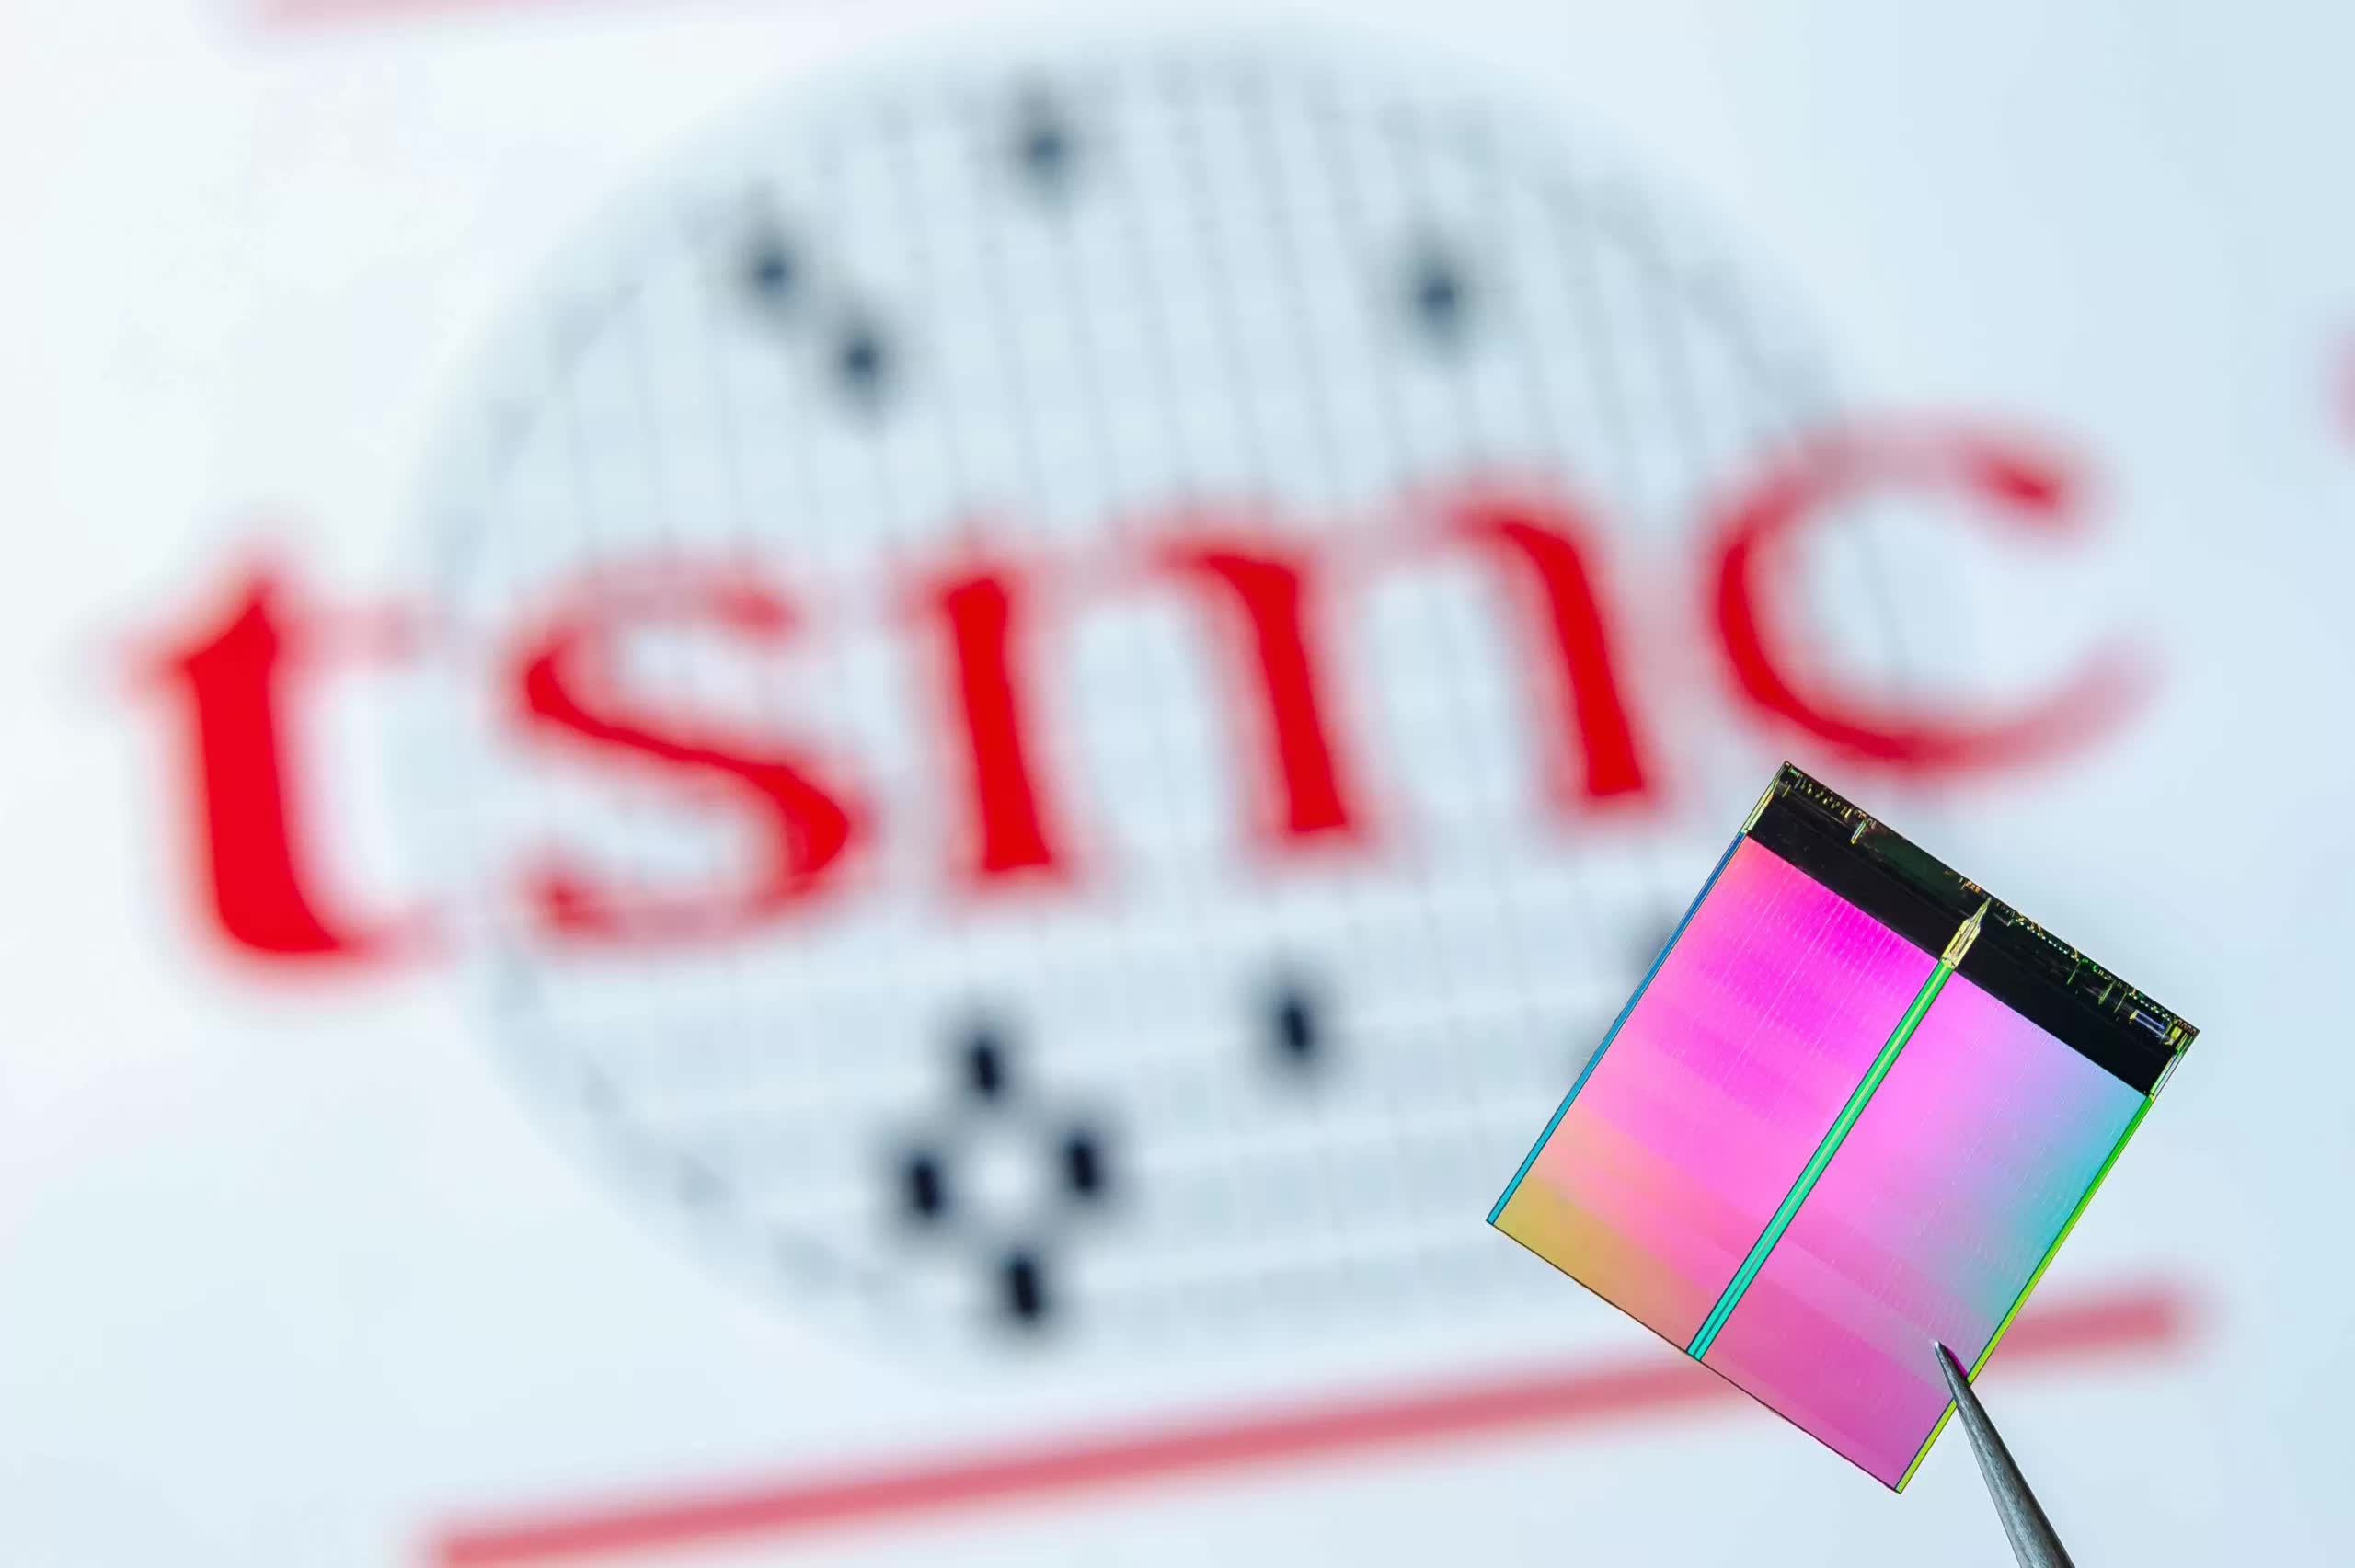 TSMC set to begin mass production of 3nm chips